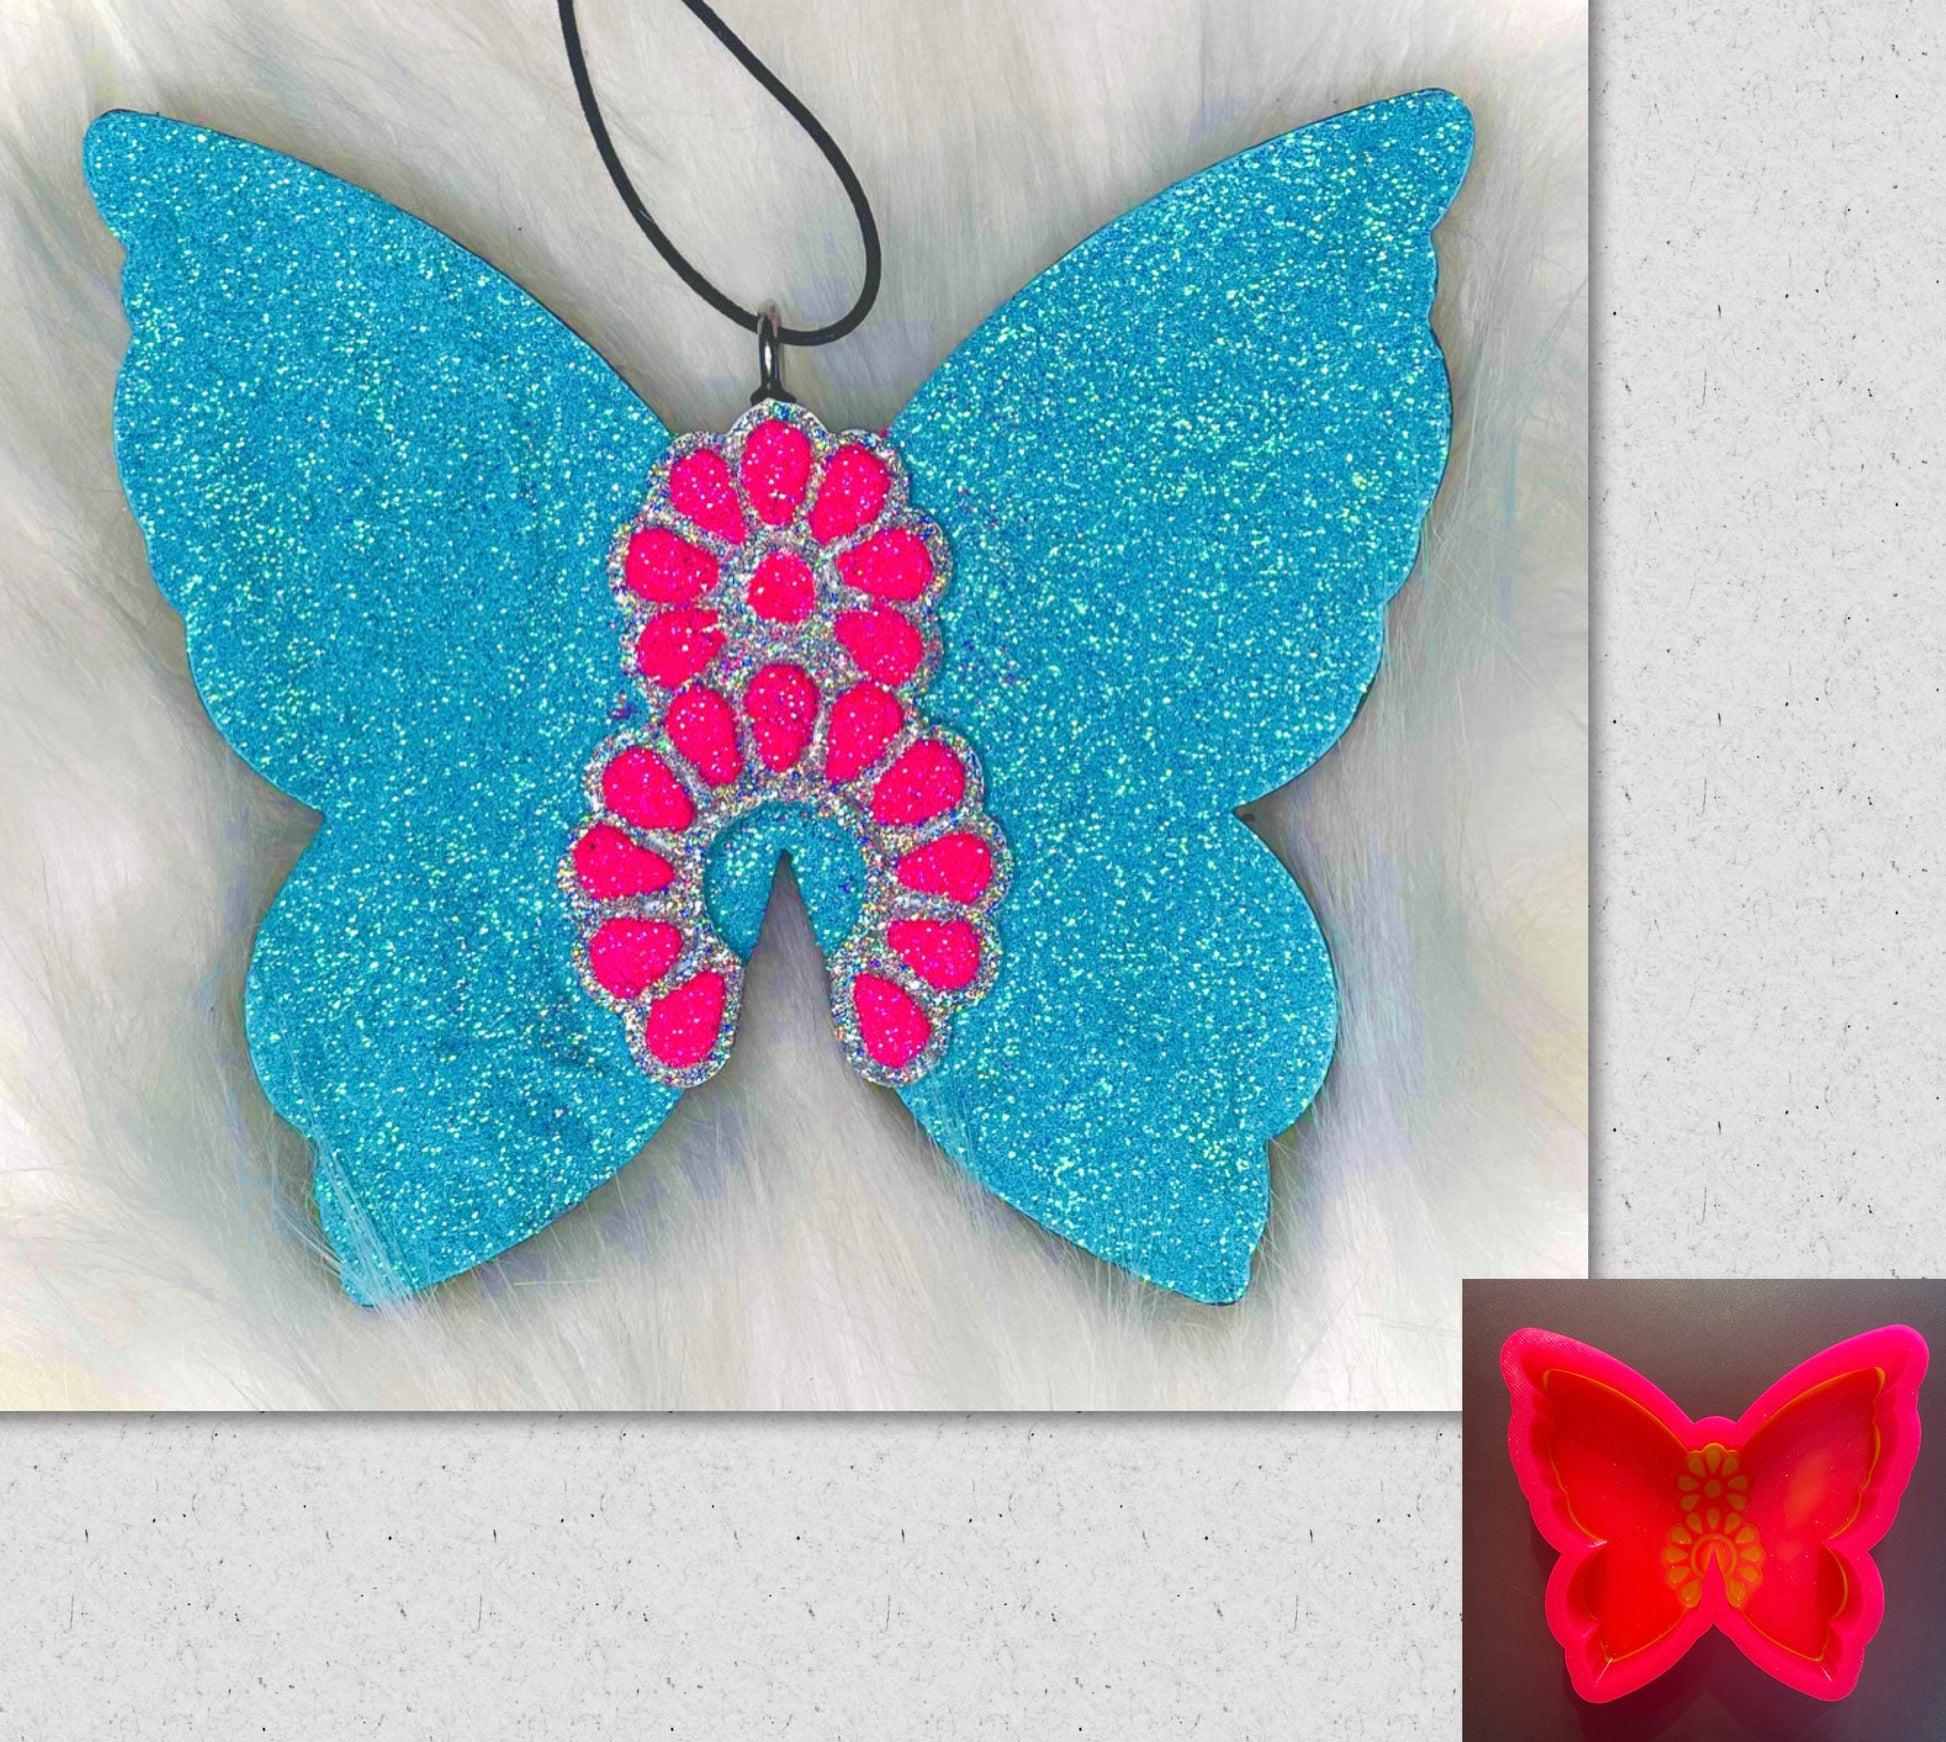 Squash Blossom Butterfly Mold